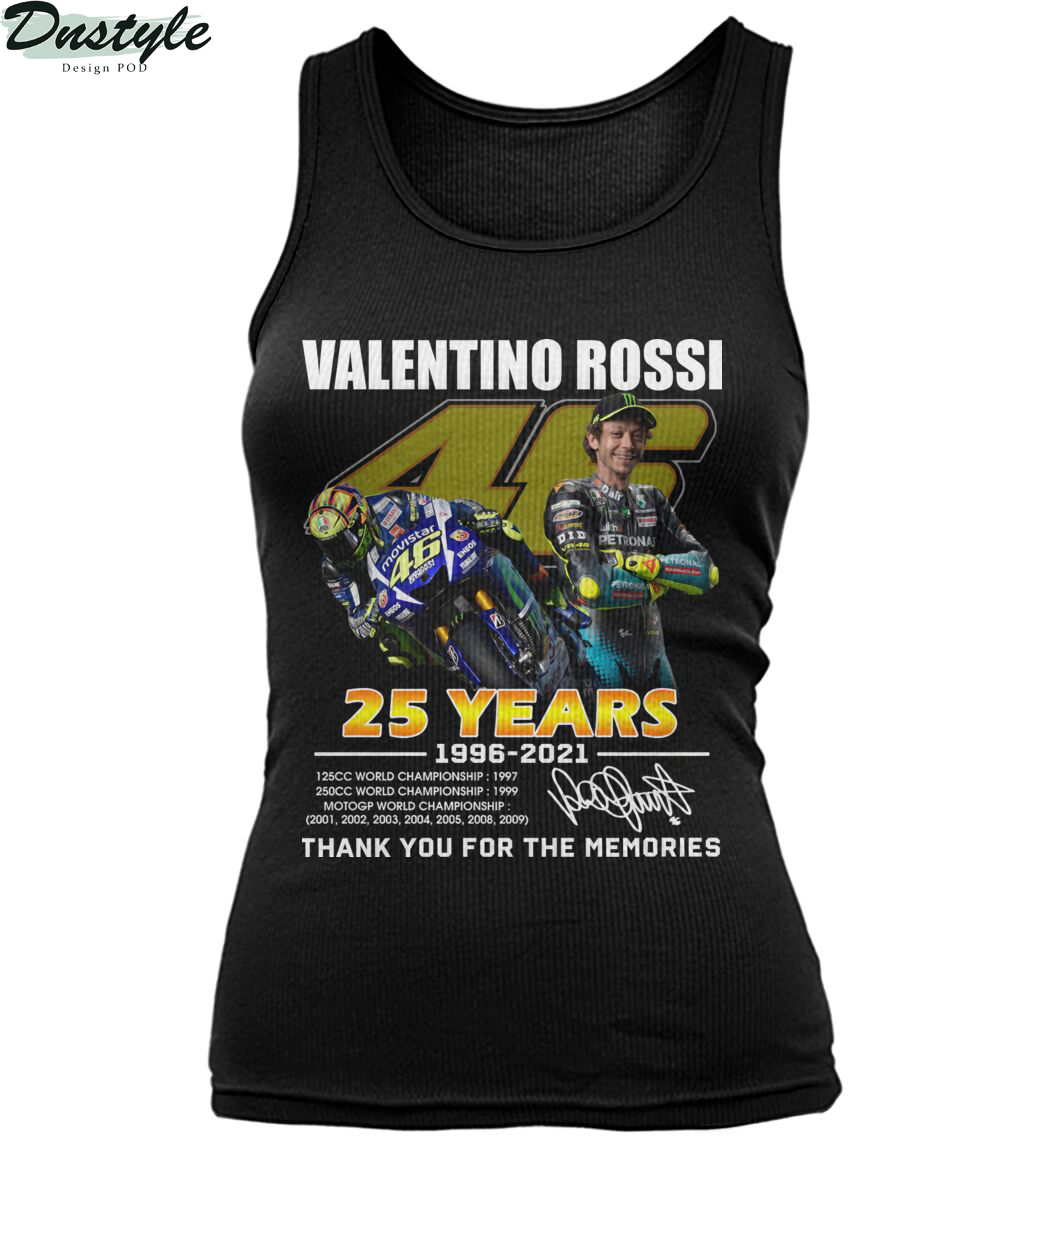 Valentino rossi 25 years thank you for the memories shirt